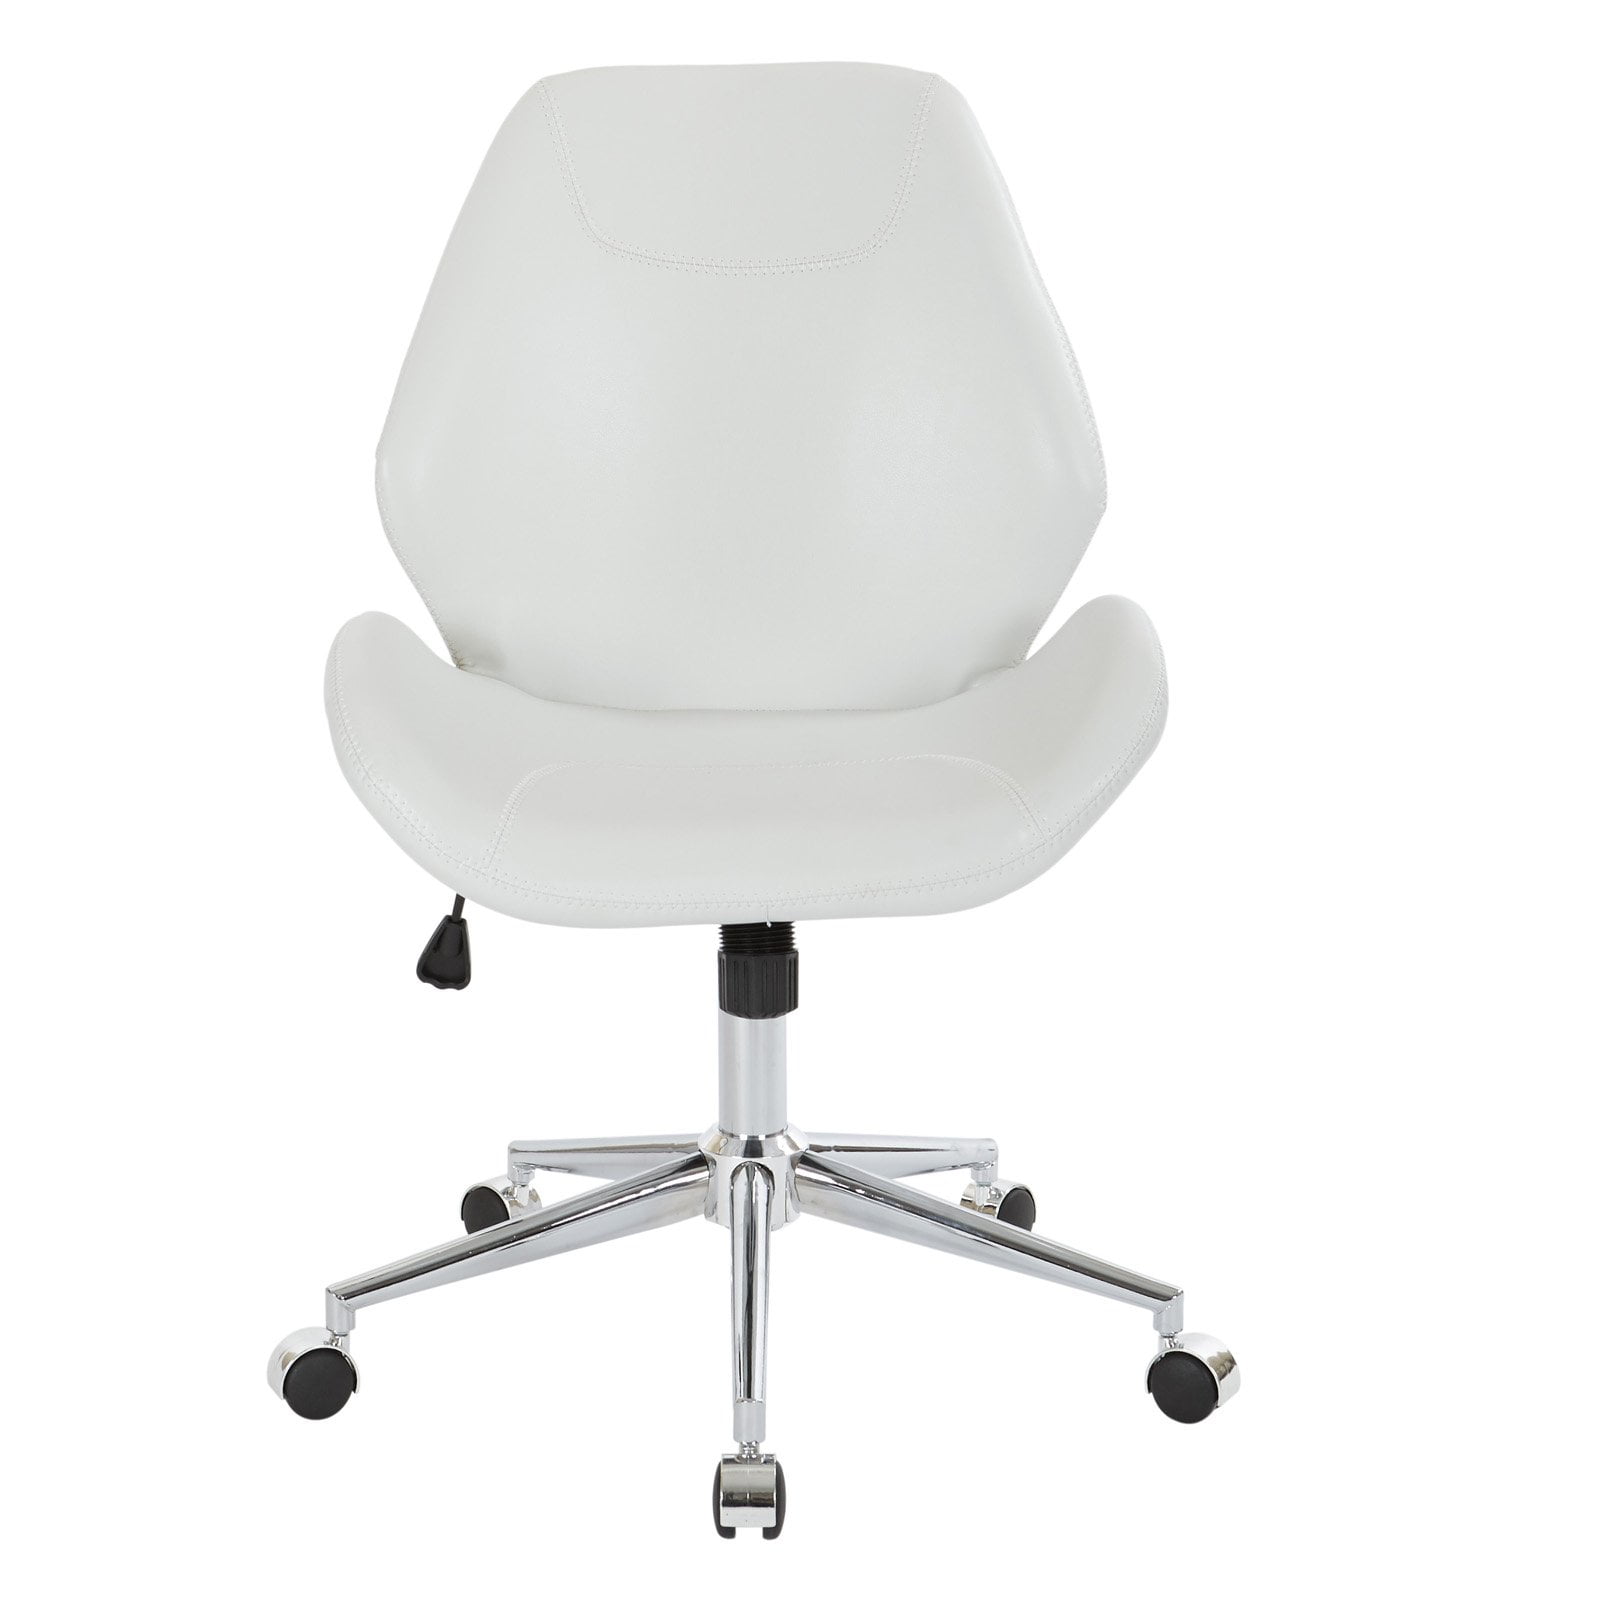 OSP Home Furnishings Chatsworth Office Chair in White Faux Leather with